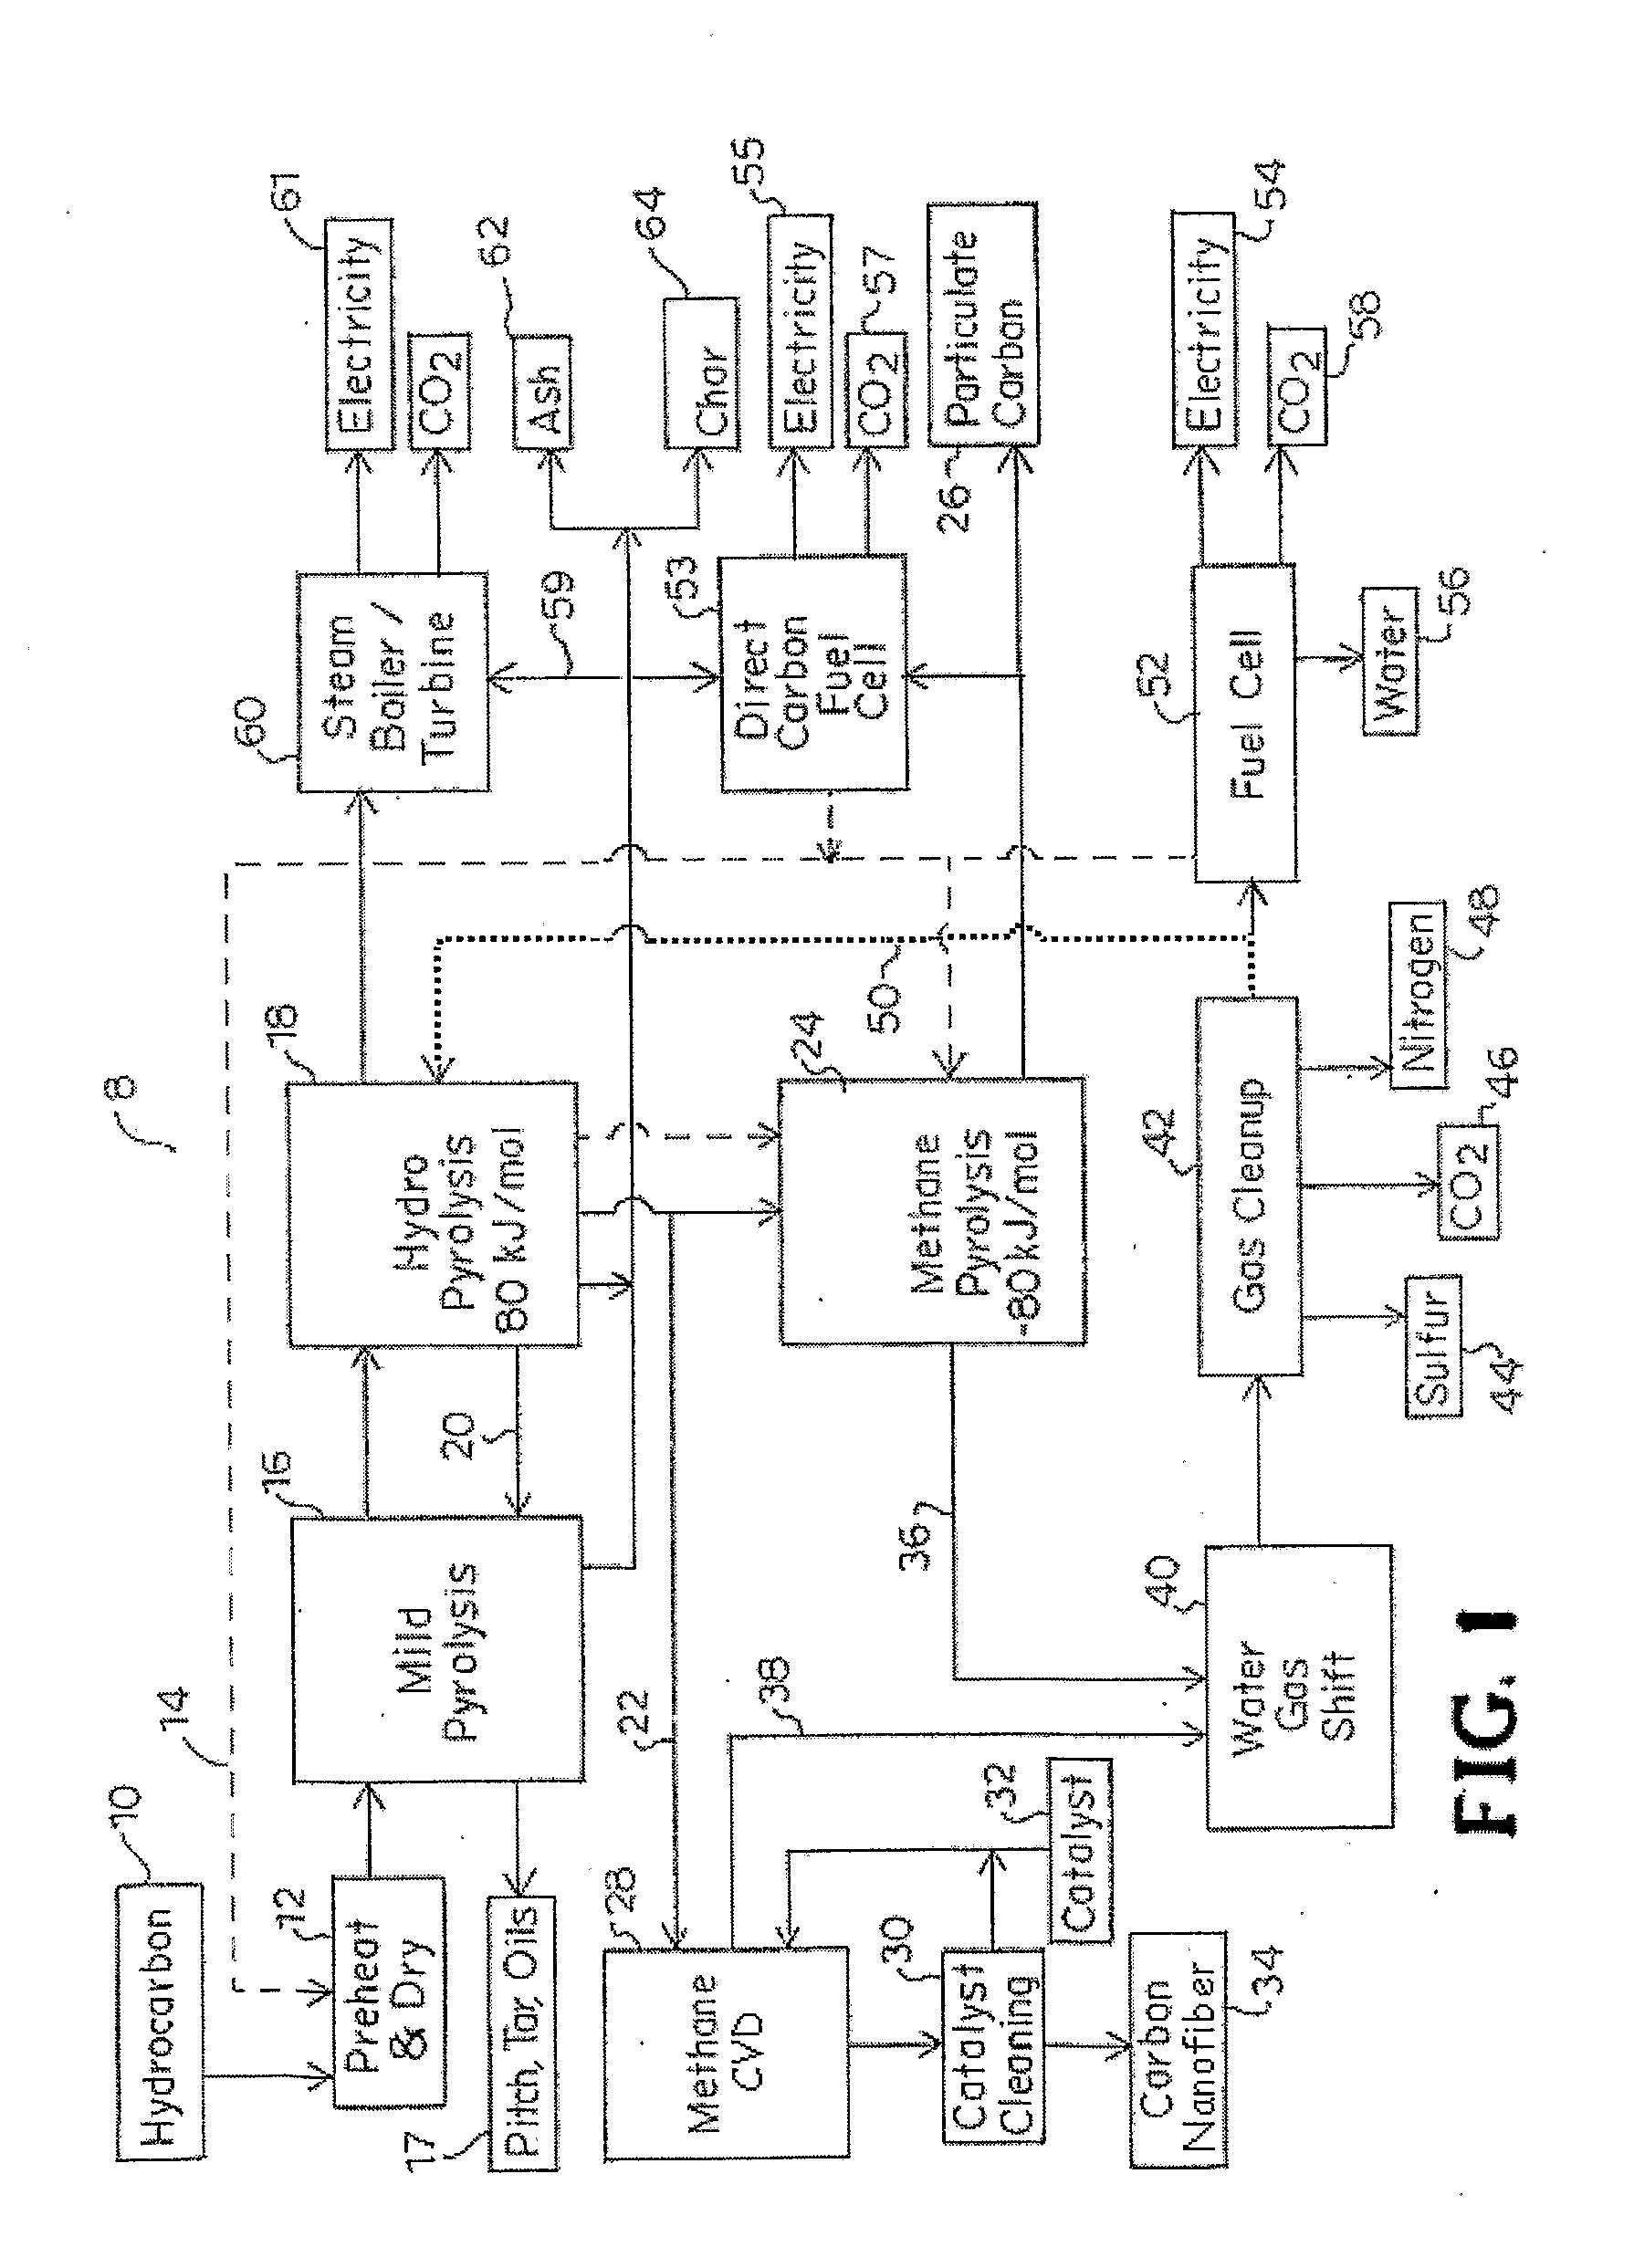 System and method for conversion of hydrocarbon materials